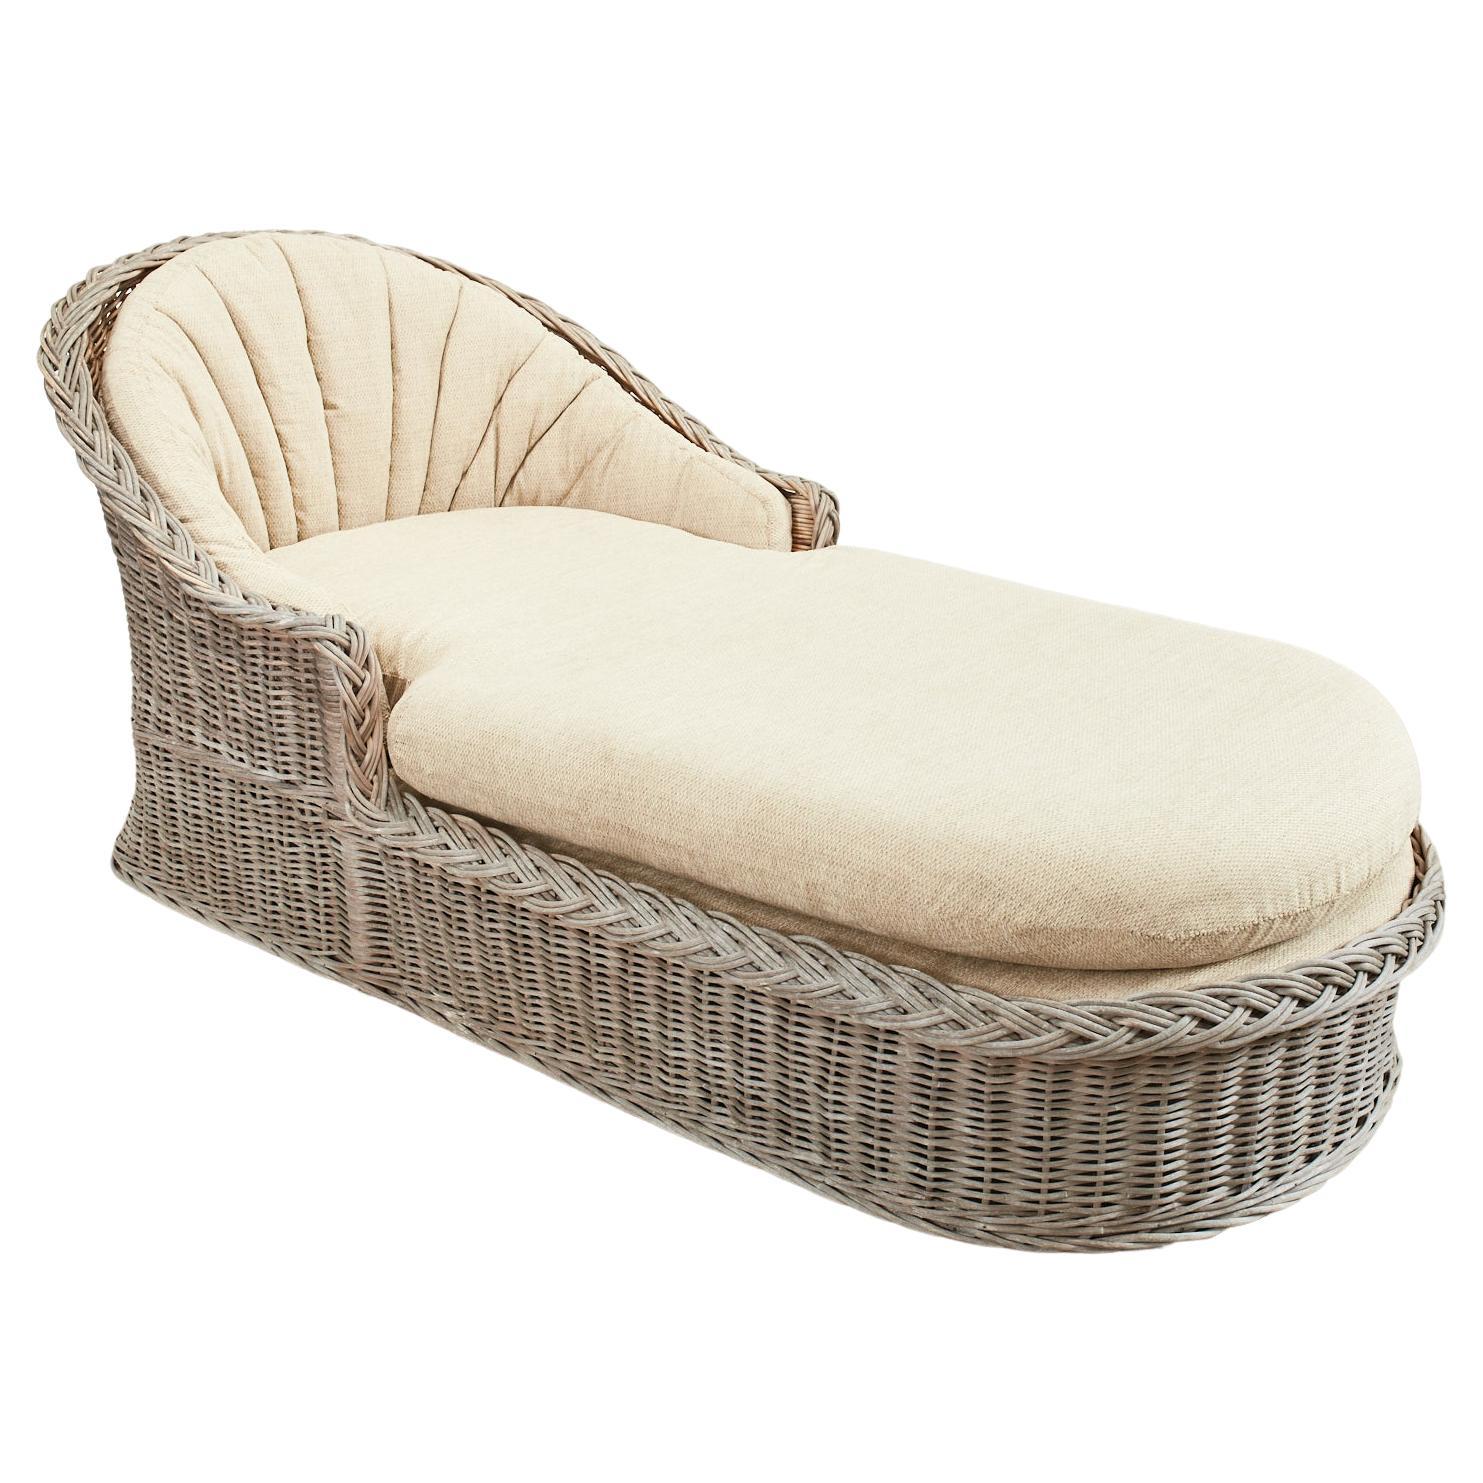 Michael Taylor Style Rattan Wicker Chaise Lounge